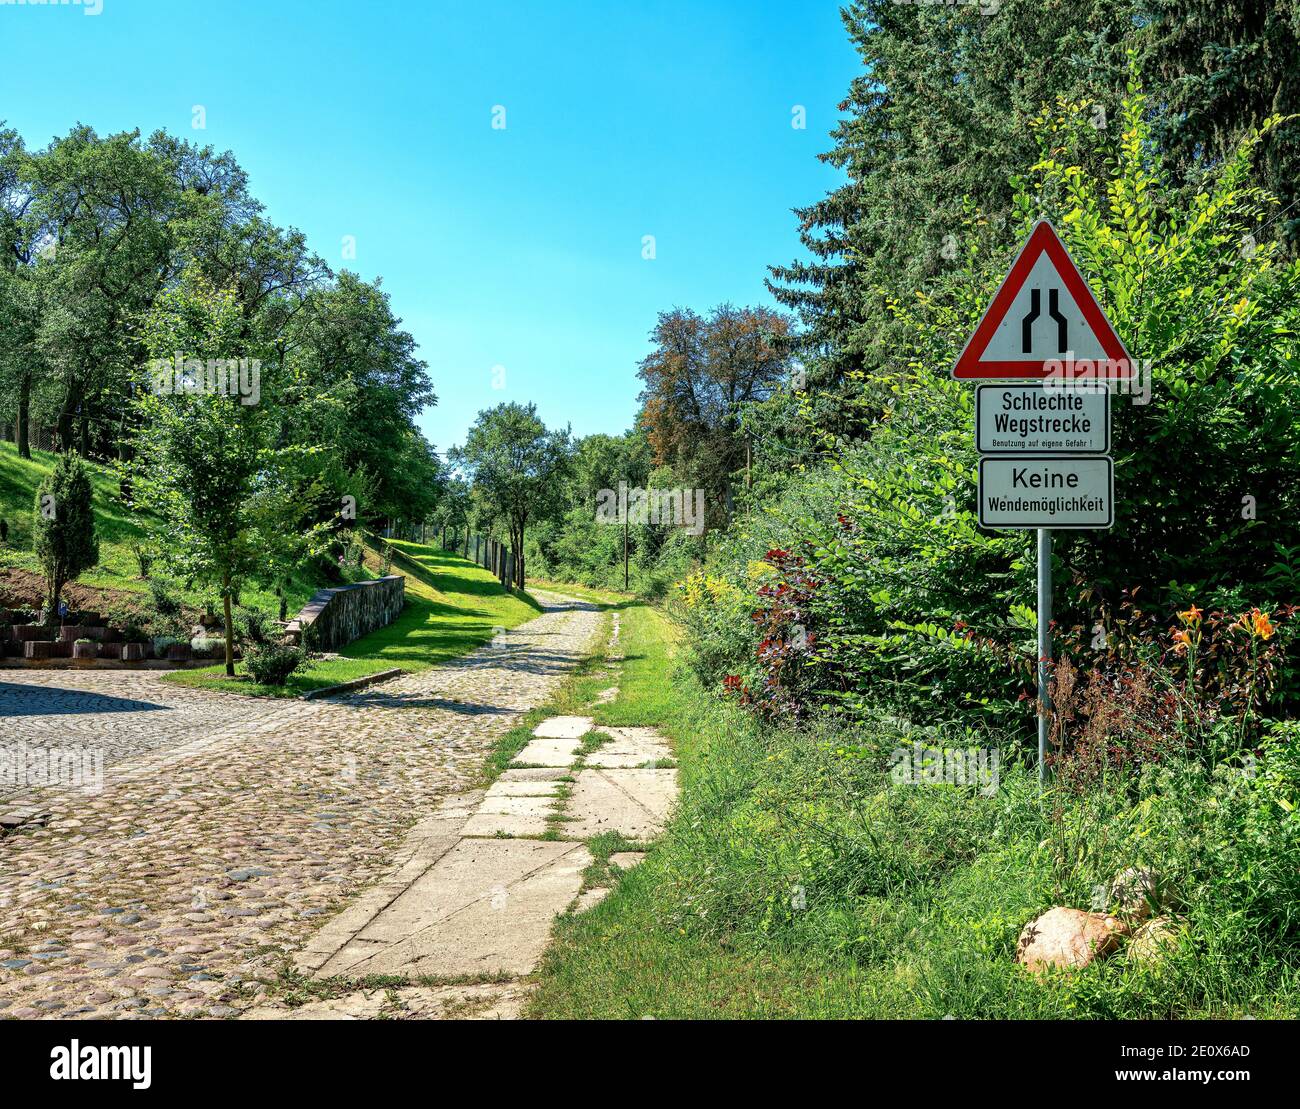 Attention Bad Route For Cyclists And Cars Stock Photo